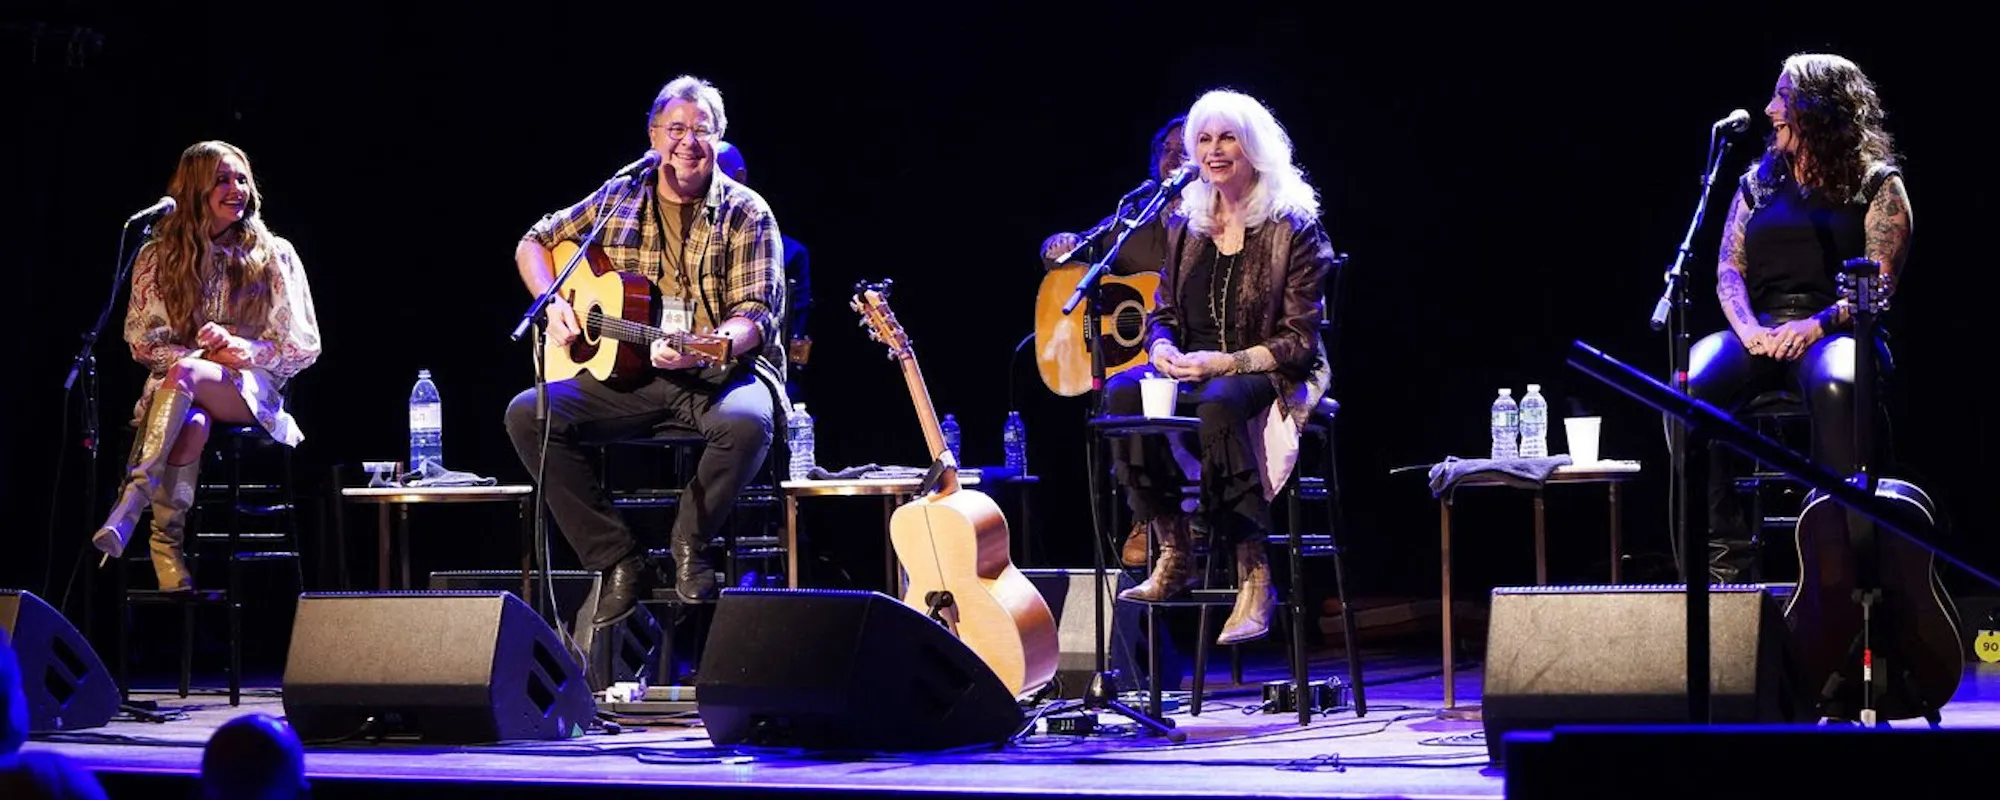 Vince Gill, Emmylou Harris, Ashley McBryde, Carly Pearce Perform at ‘All for the Hall New York’